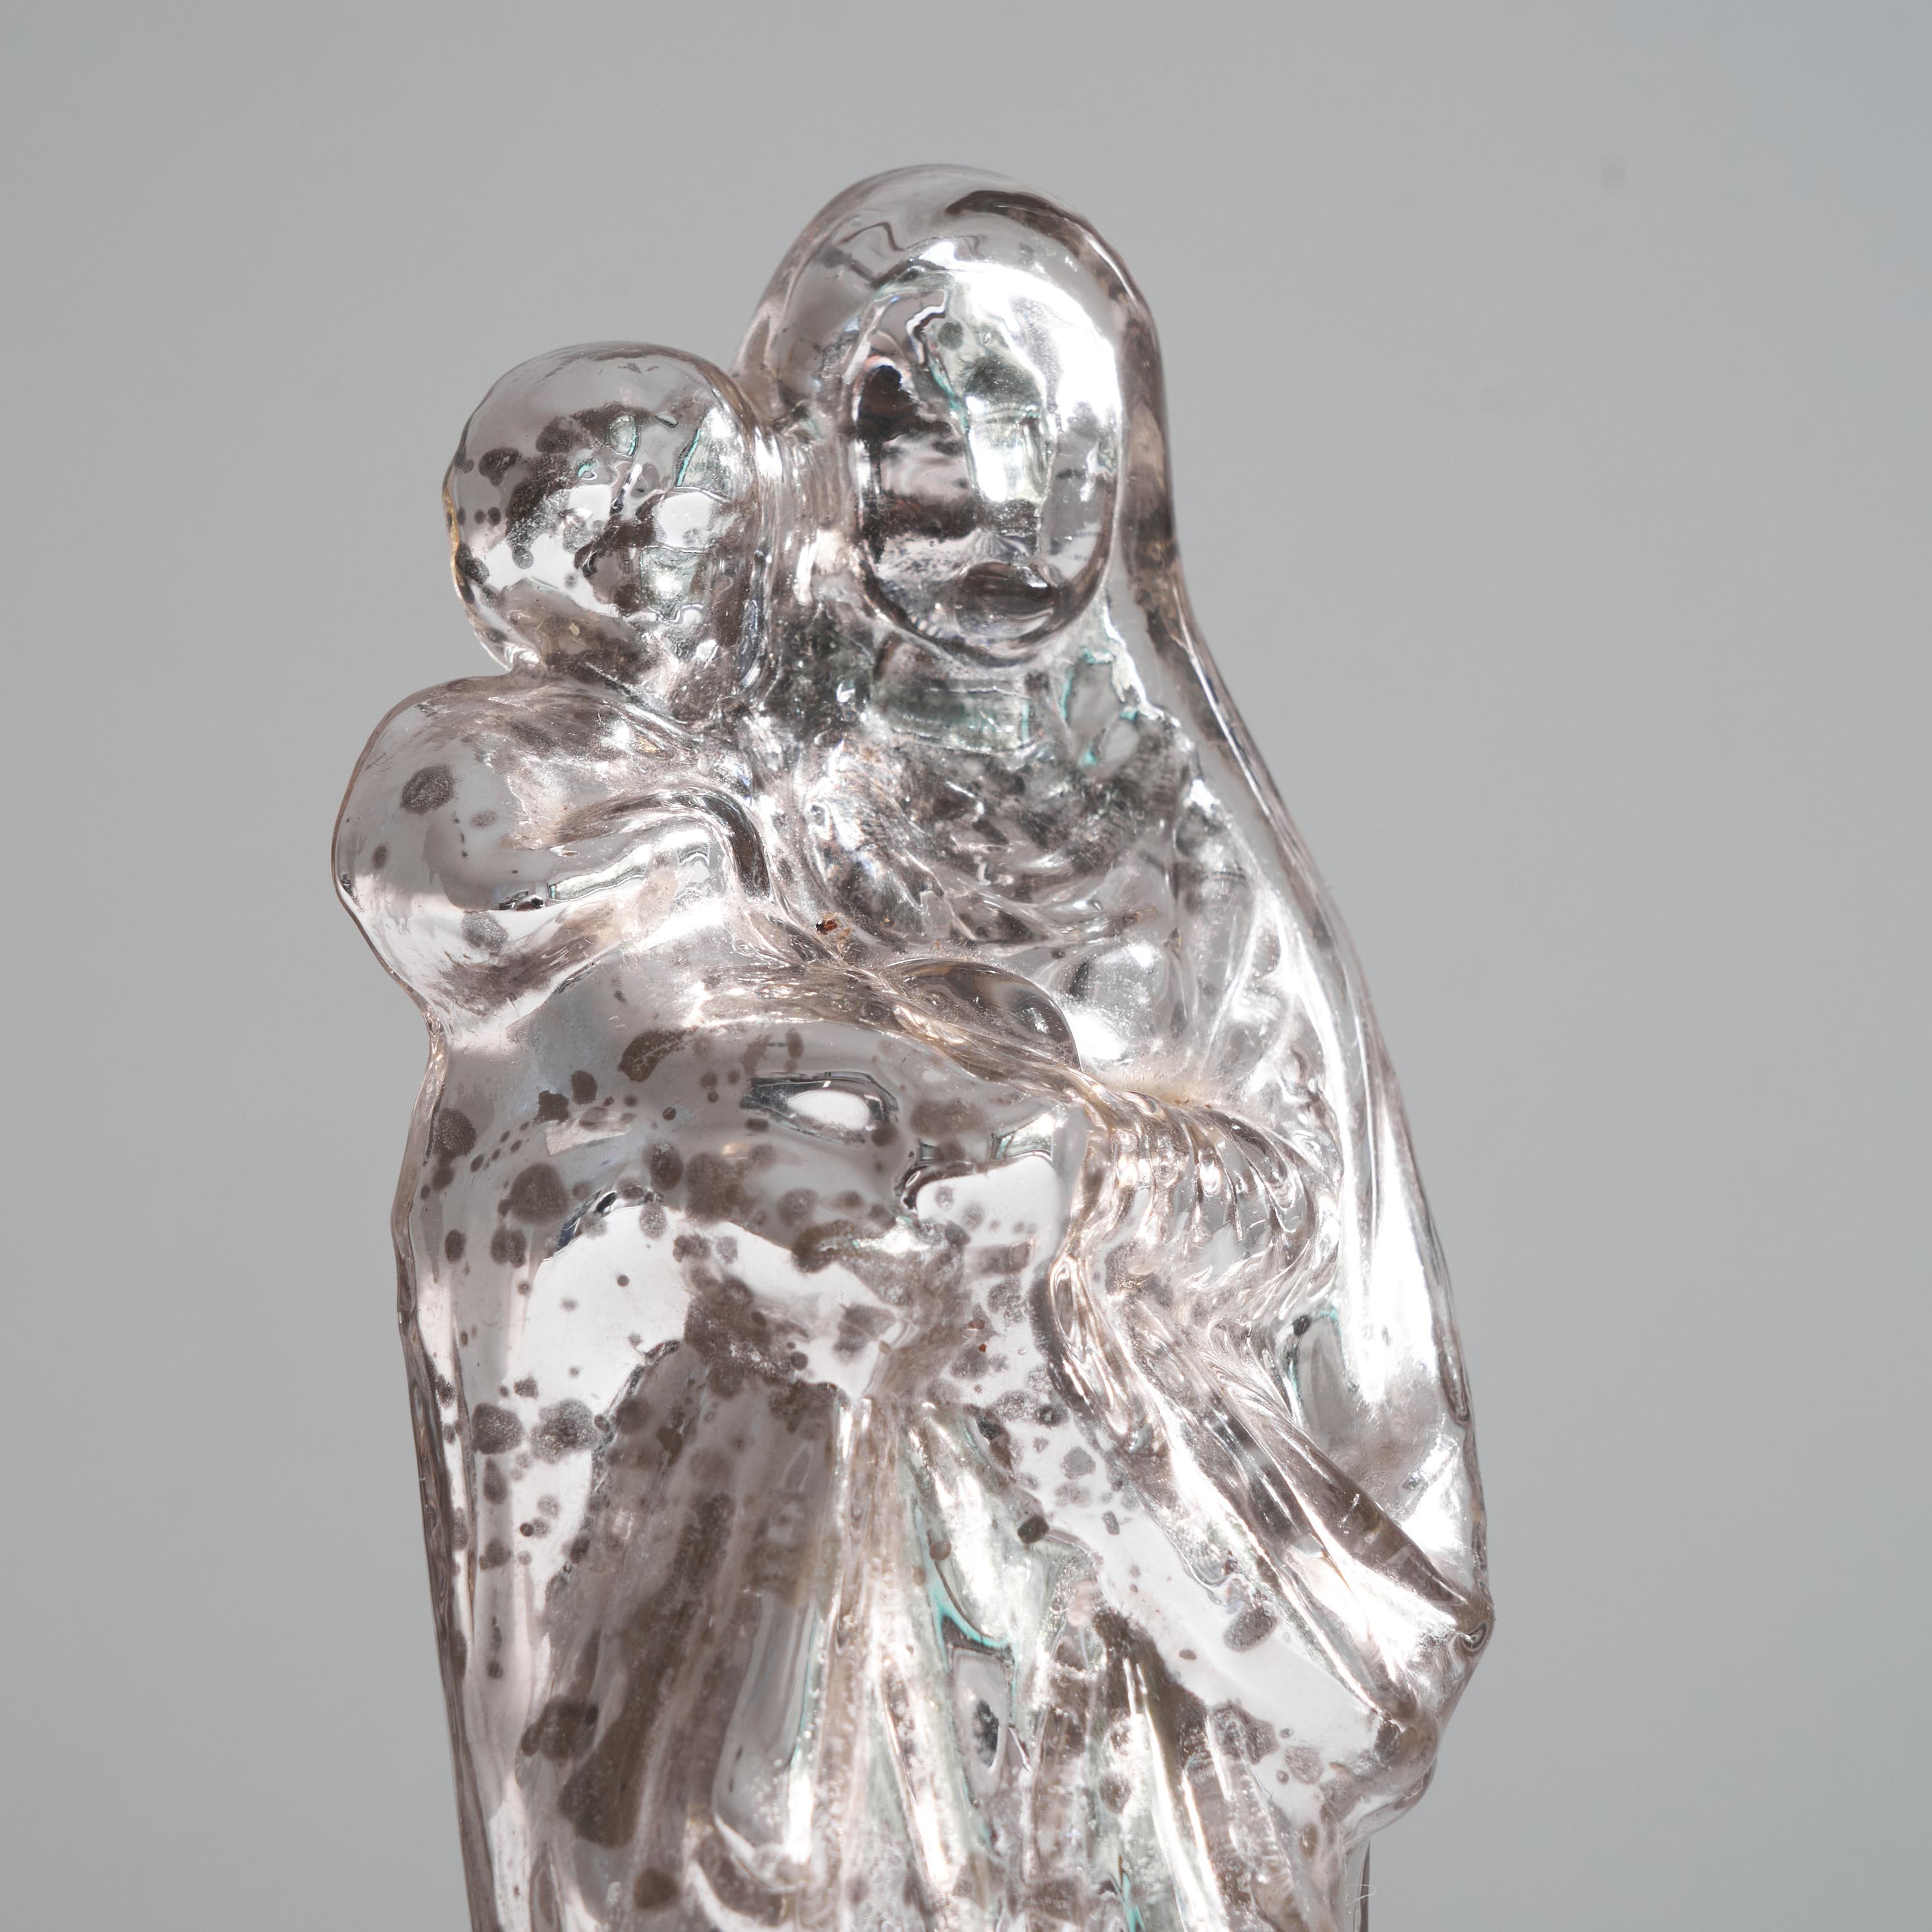 Antique Patinated Mercury glass Madonna with child. Turn of the century / Early 20th century. 

This is a wonderful mercury glass Madonna with child figurine. It is made of molded glass with a silvered interior, creating a visually very pleasing